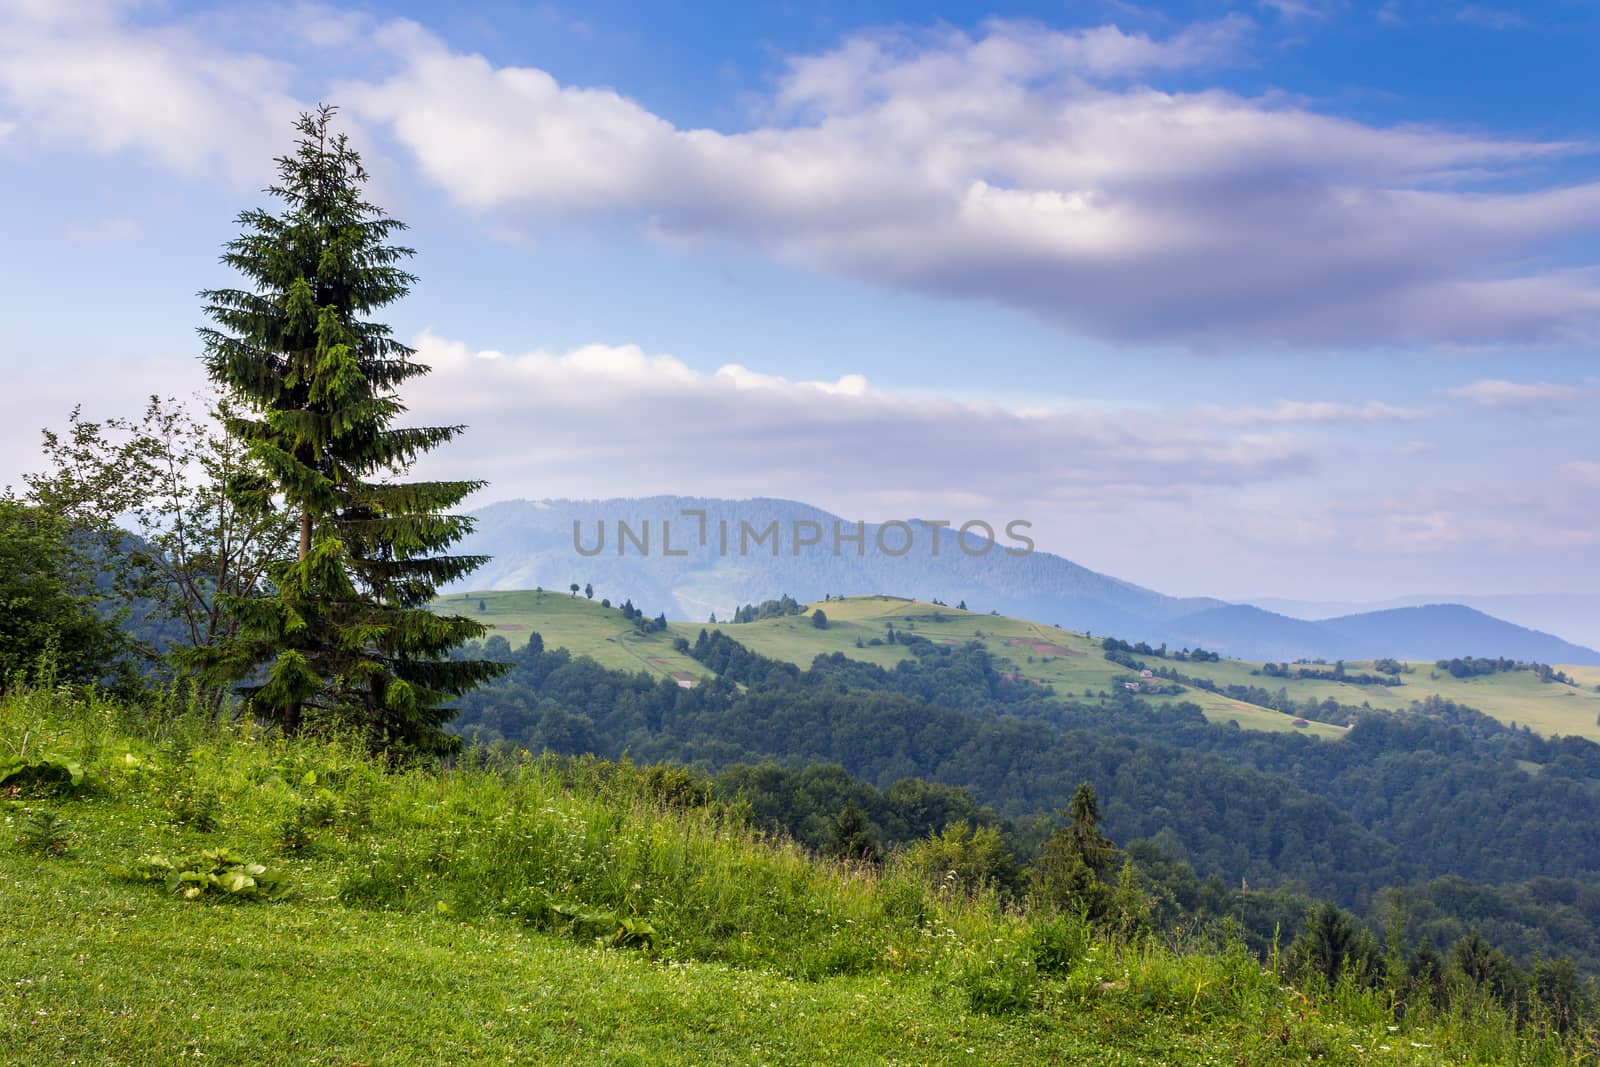 tree on the edge of clearing in mountains by Pellinni